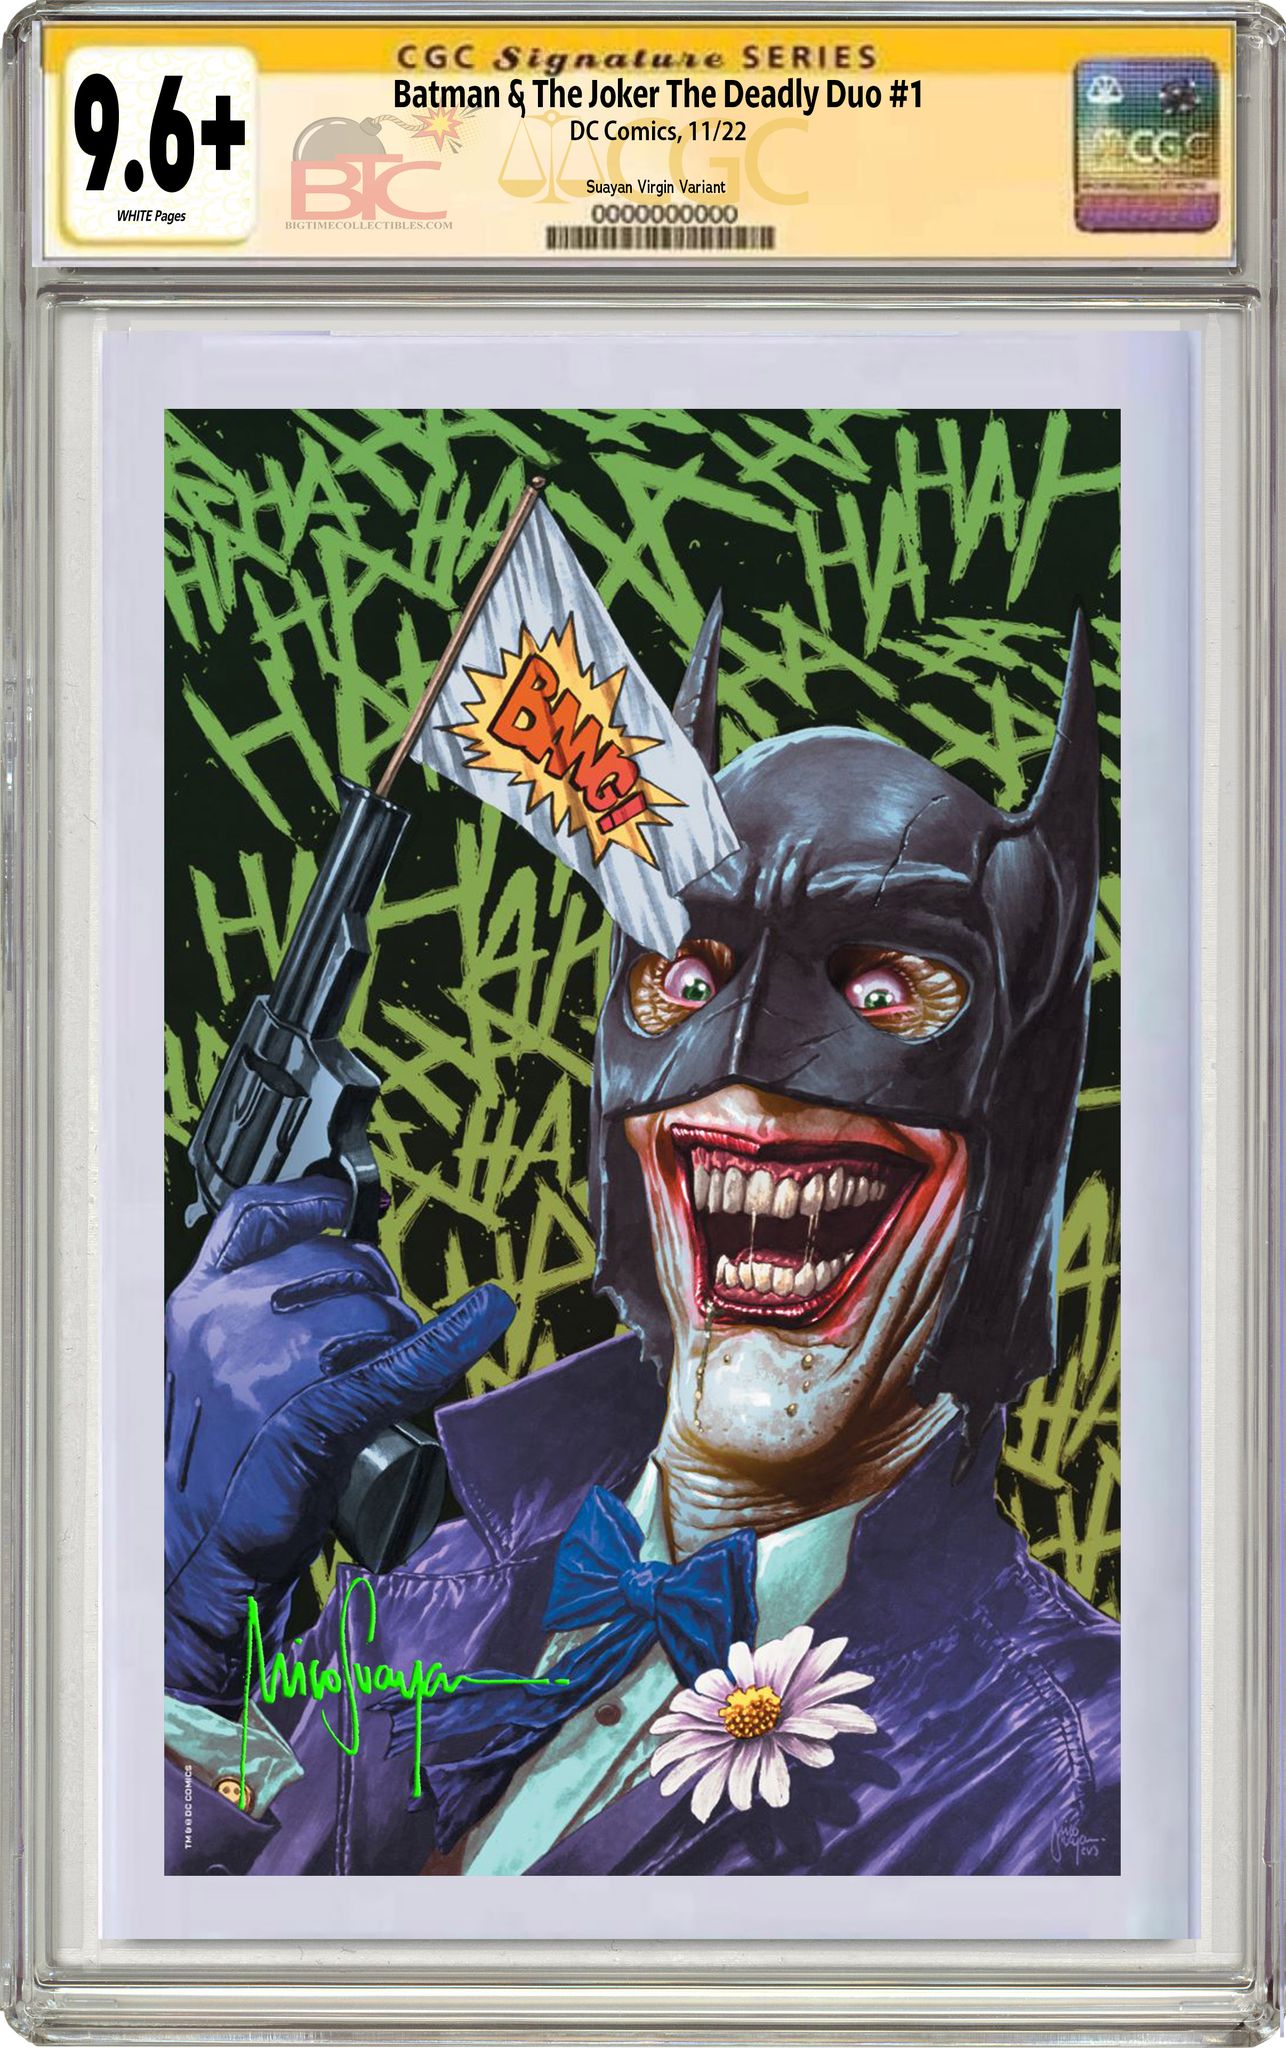 BATMAN & THE JOKER THE DEADLY DUO #1 MICO SUAYAN EXCLUSIVE VARIANT CGC GRADED OPTIONS